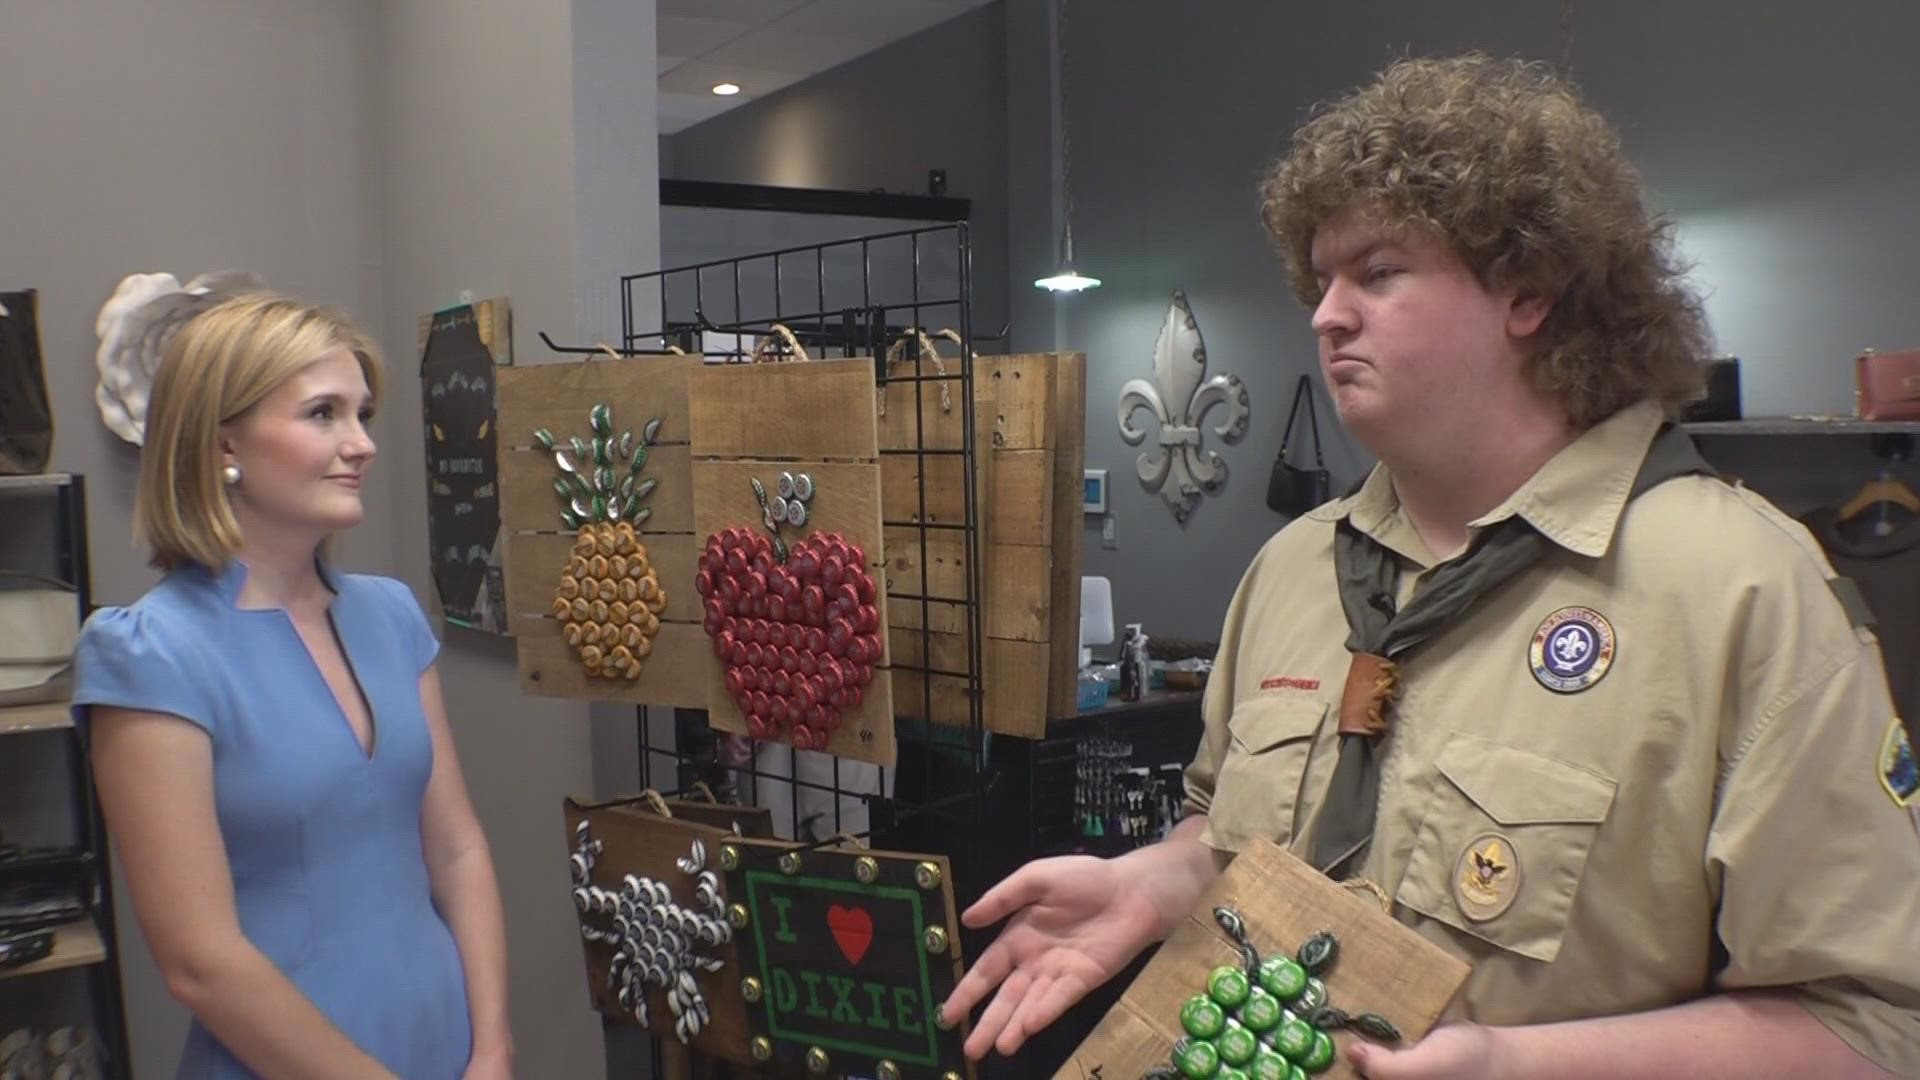 A local 16-year-old is on a mission to support Boy Scout troops, and he's doing it one bottle cap at a time.